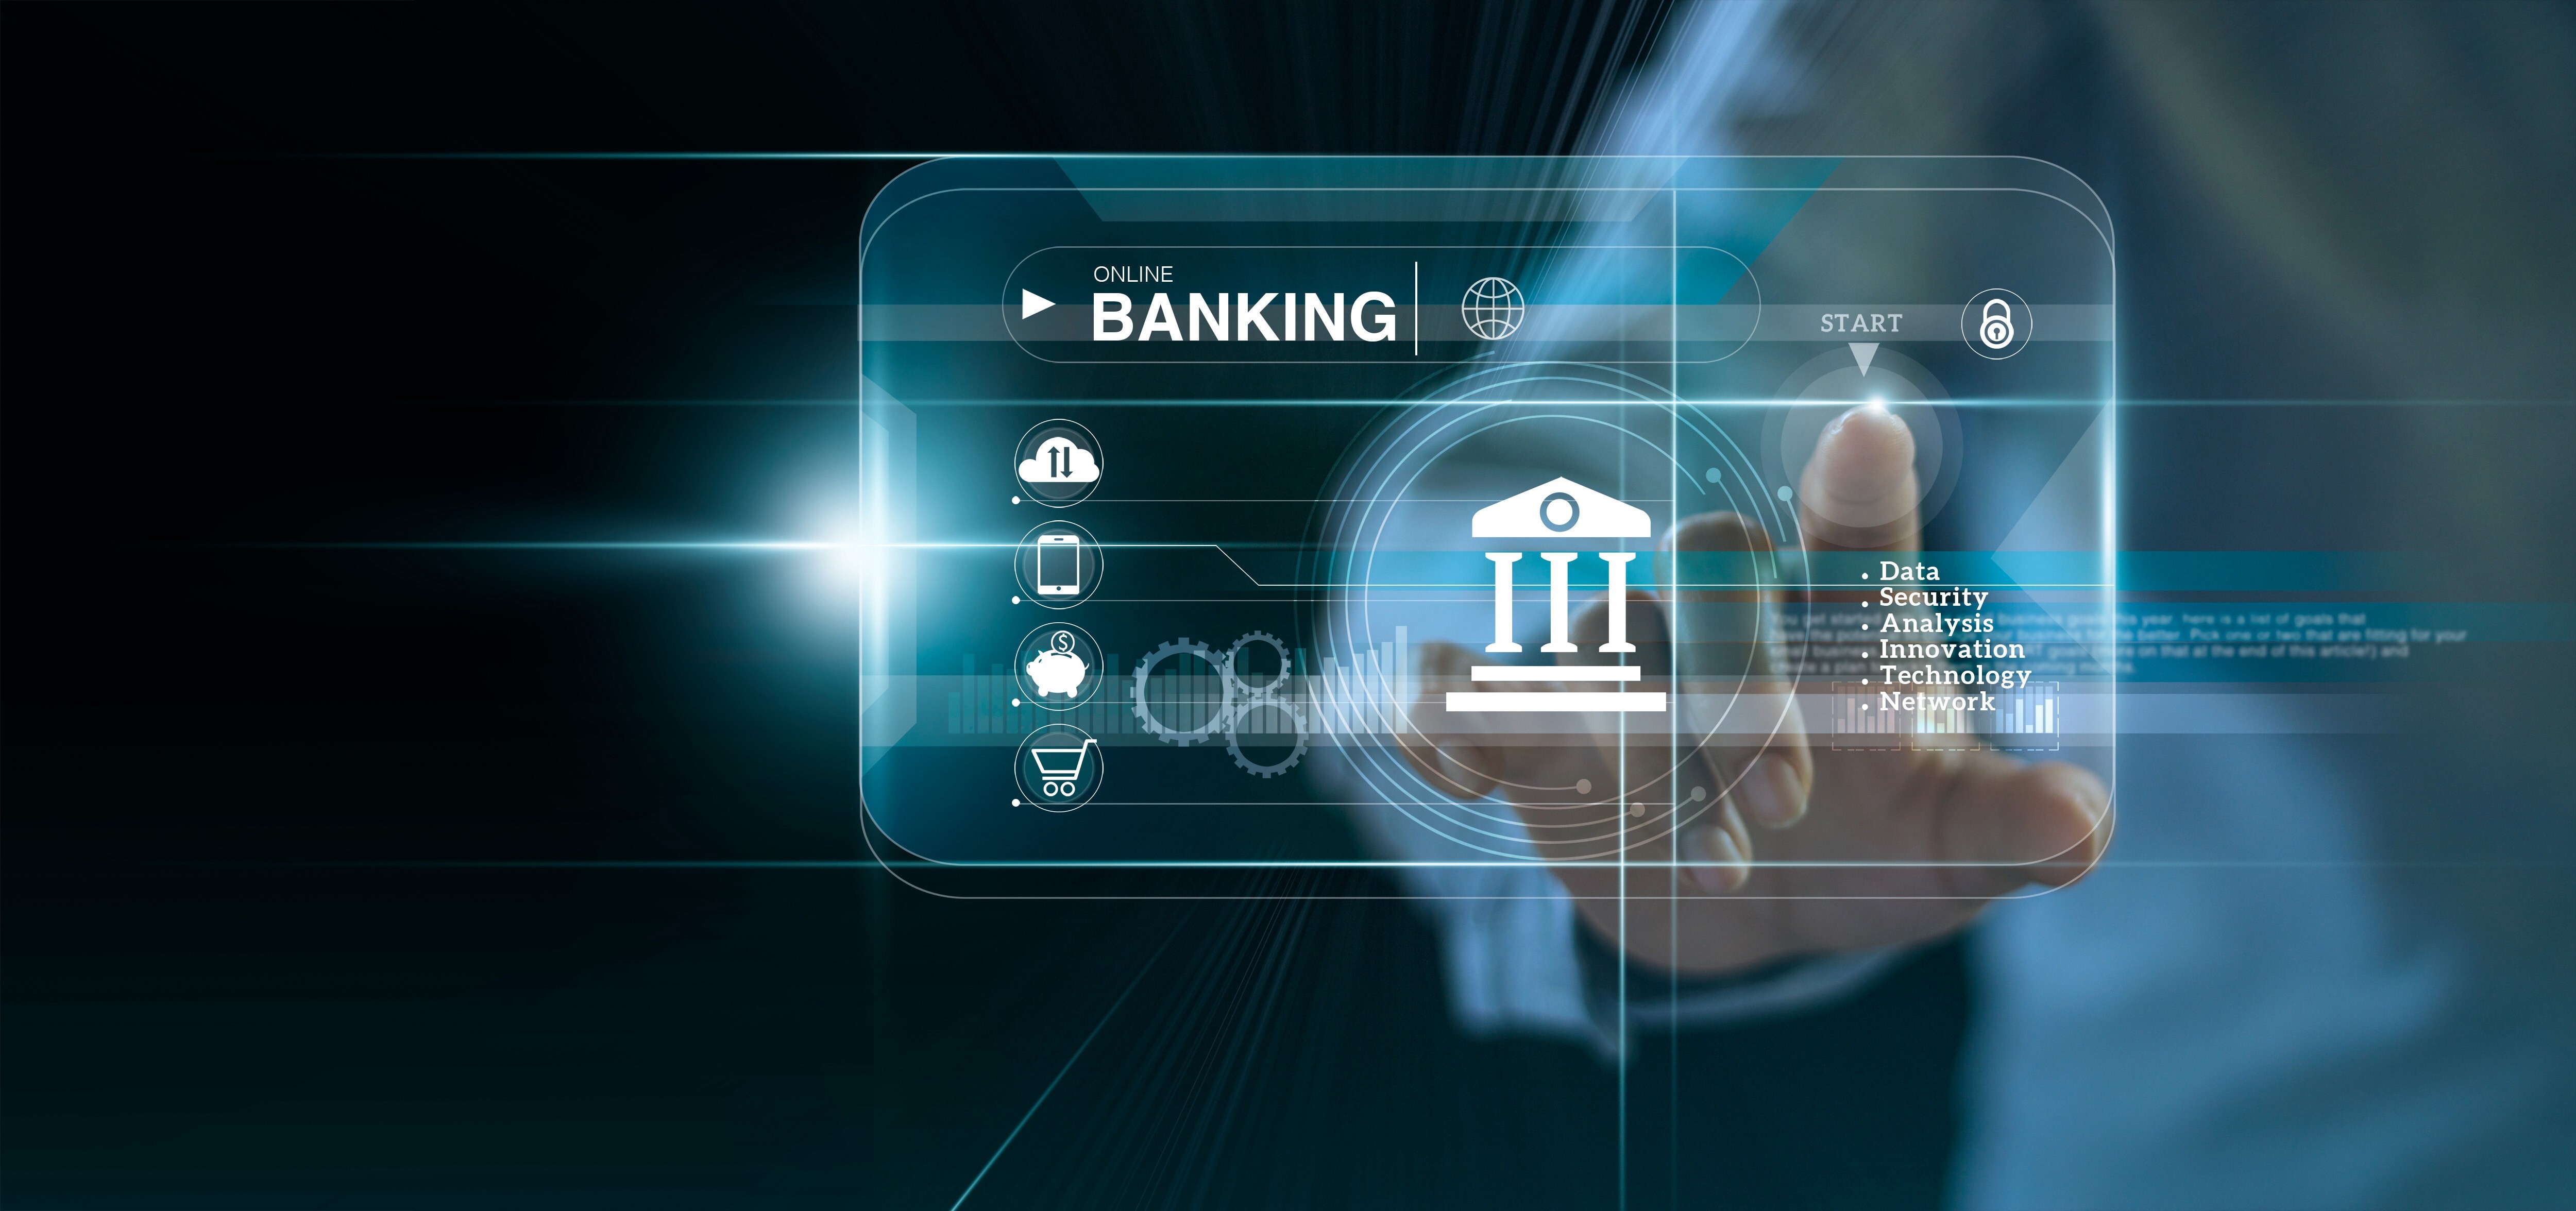 The new virtual banks are focusing on deposits, payments, loans and cards for the time being. Photo: Shutterstock